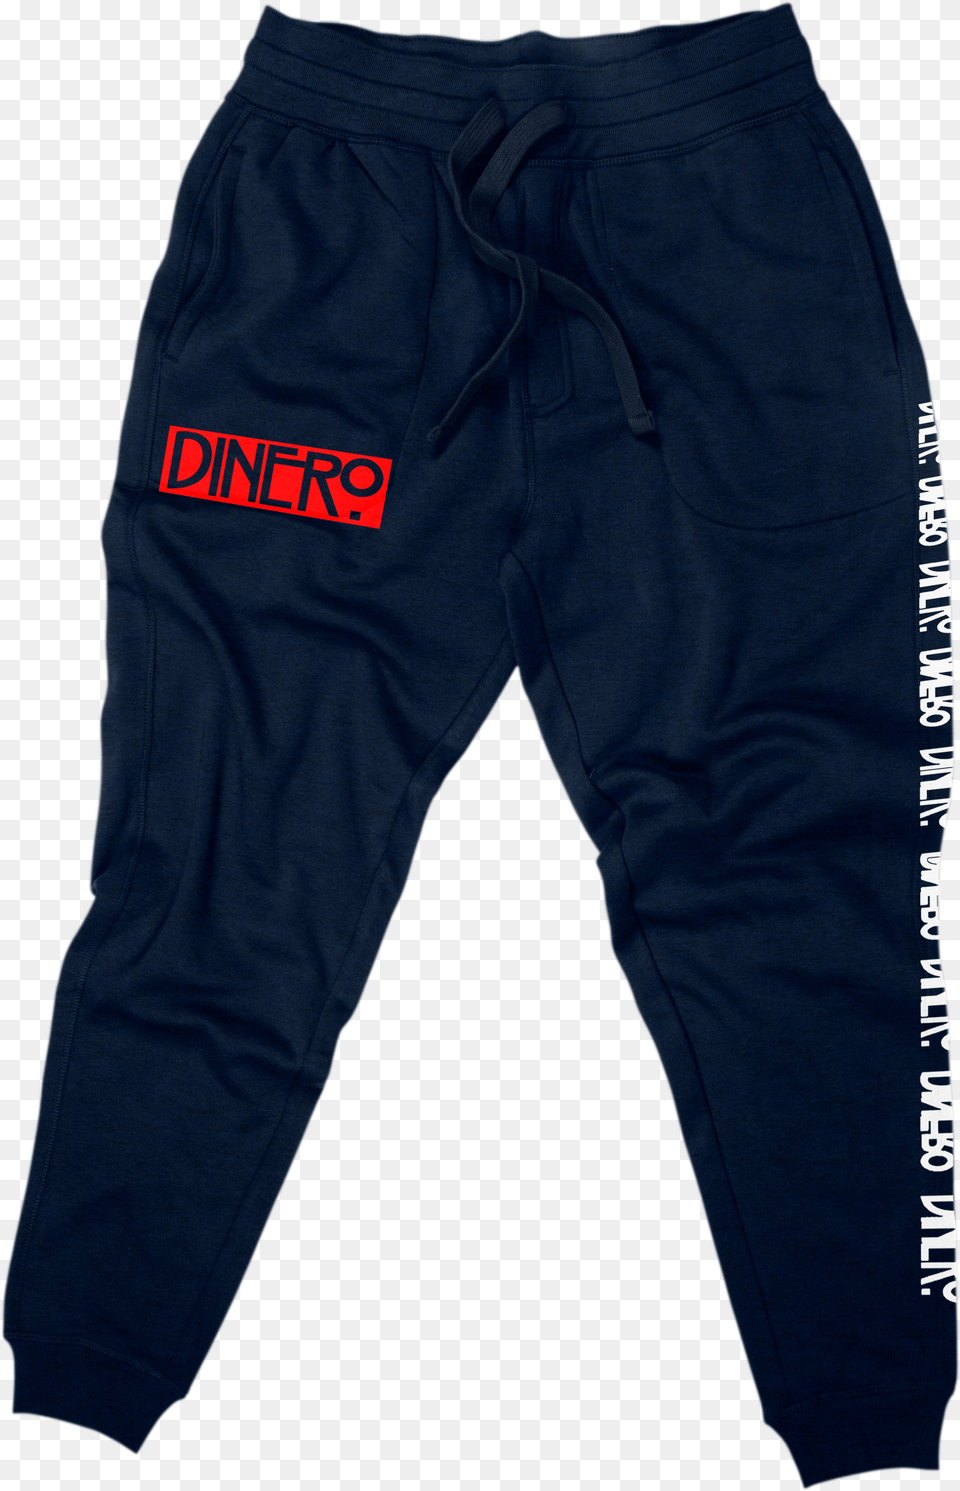 Image Of Navy Blue Dinero Clothing Joggers Pocket, Purple, Logo Free Transparent Png